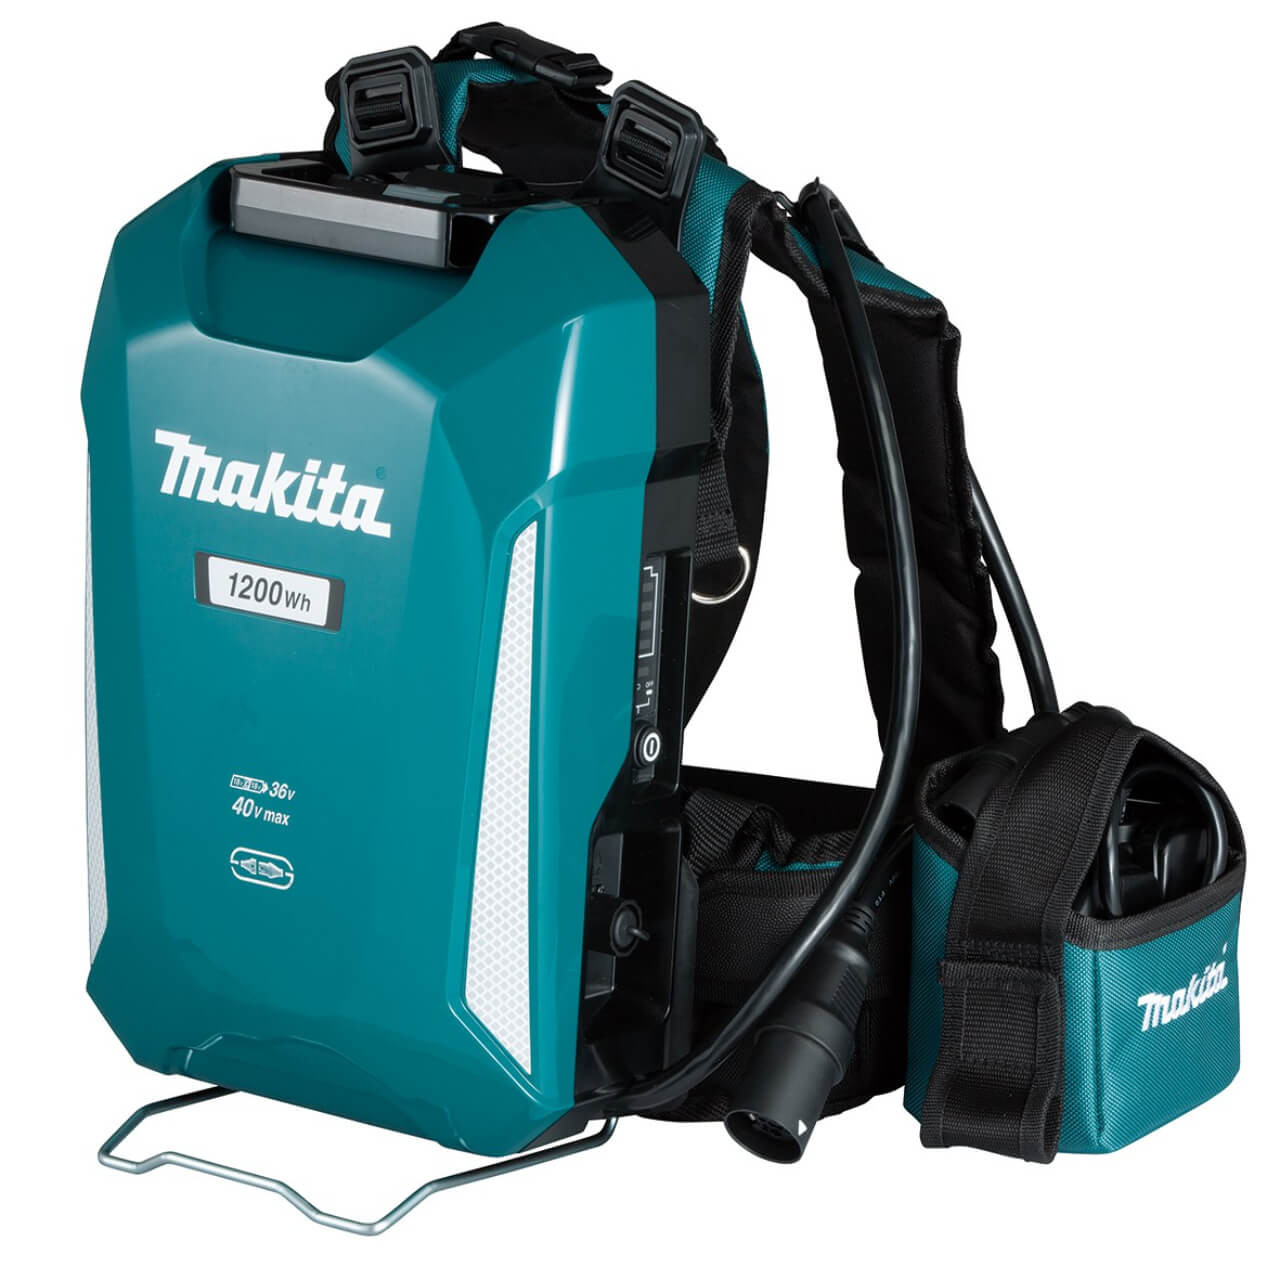 Makita 33.5Ah Portable Power Supply Kit - Includes: Charger & 18Vx2 LXT Battery Adaptor